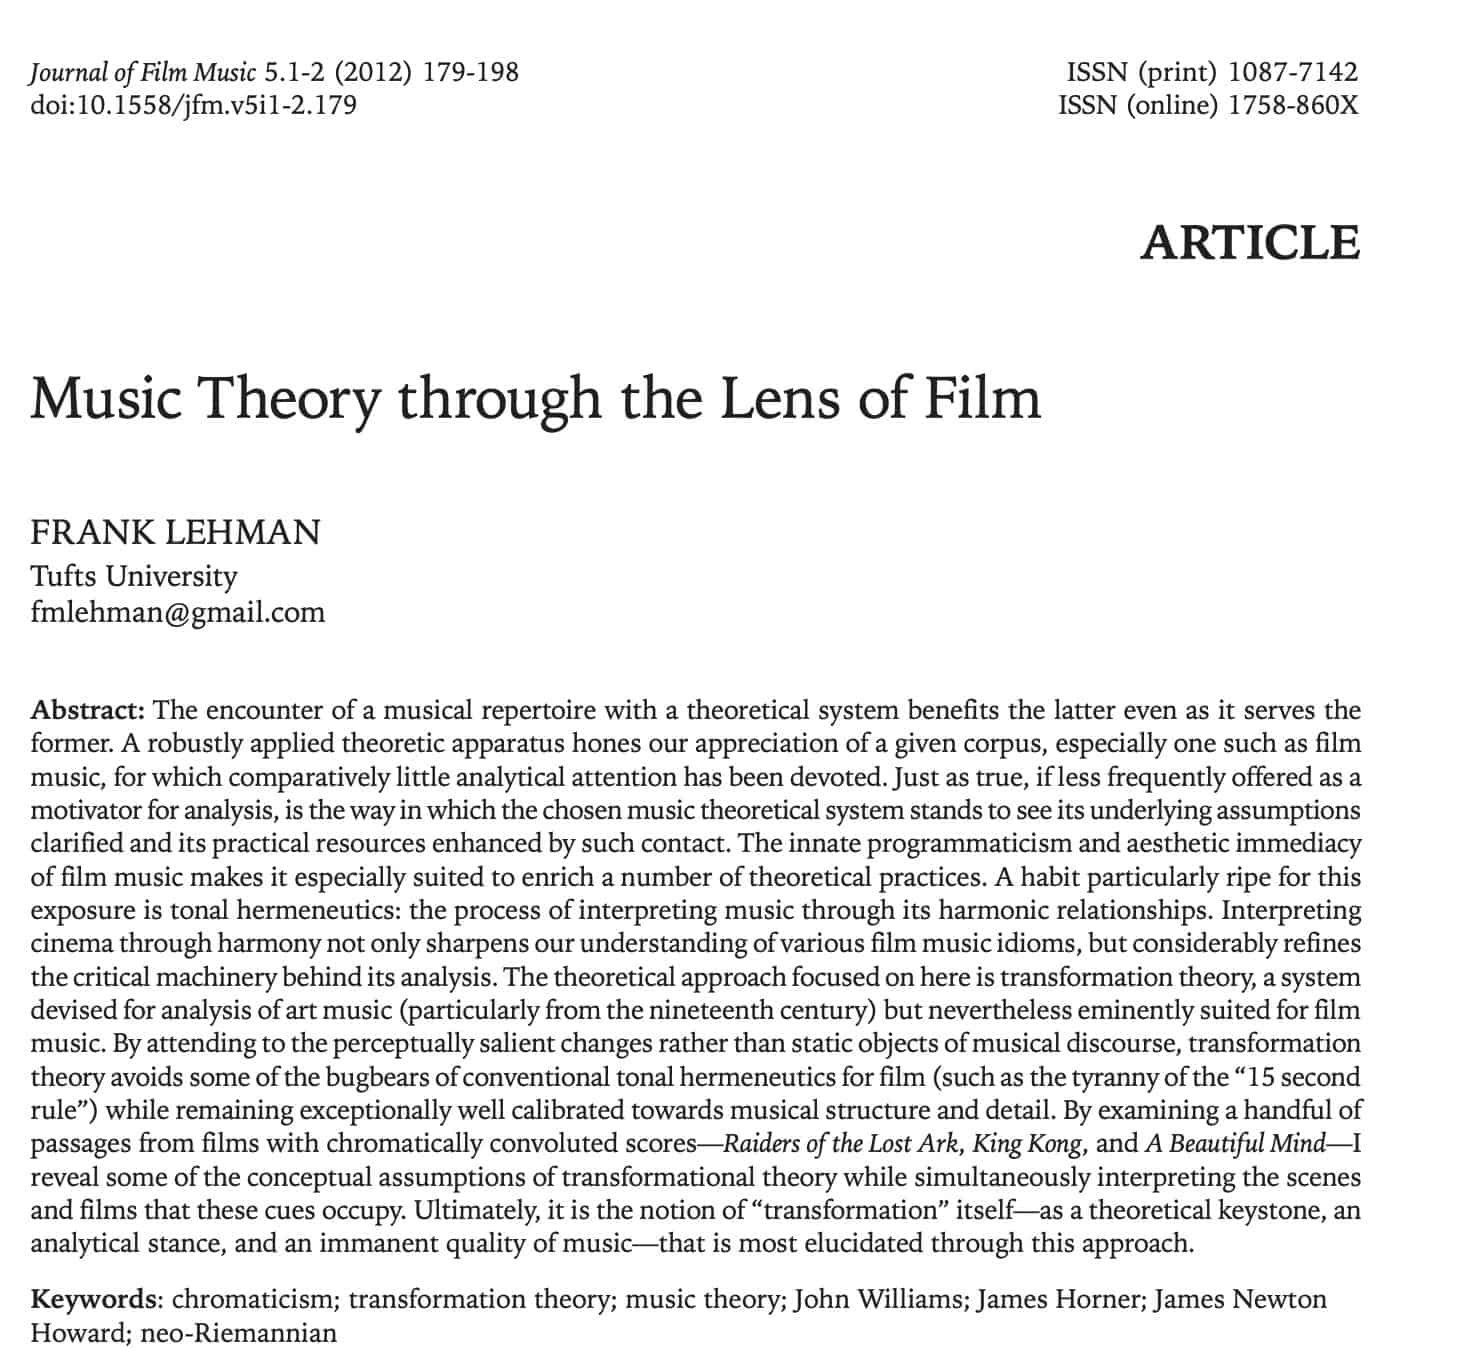 Music Theory Through the Lens of Film by Frank Lehman